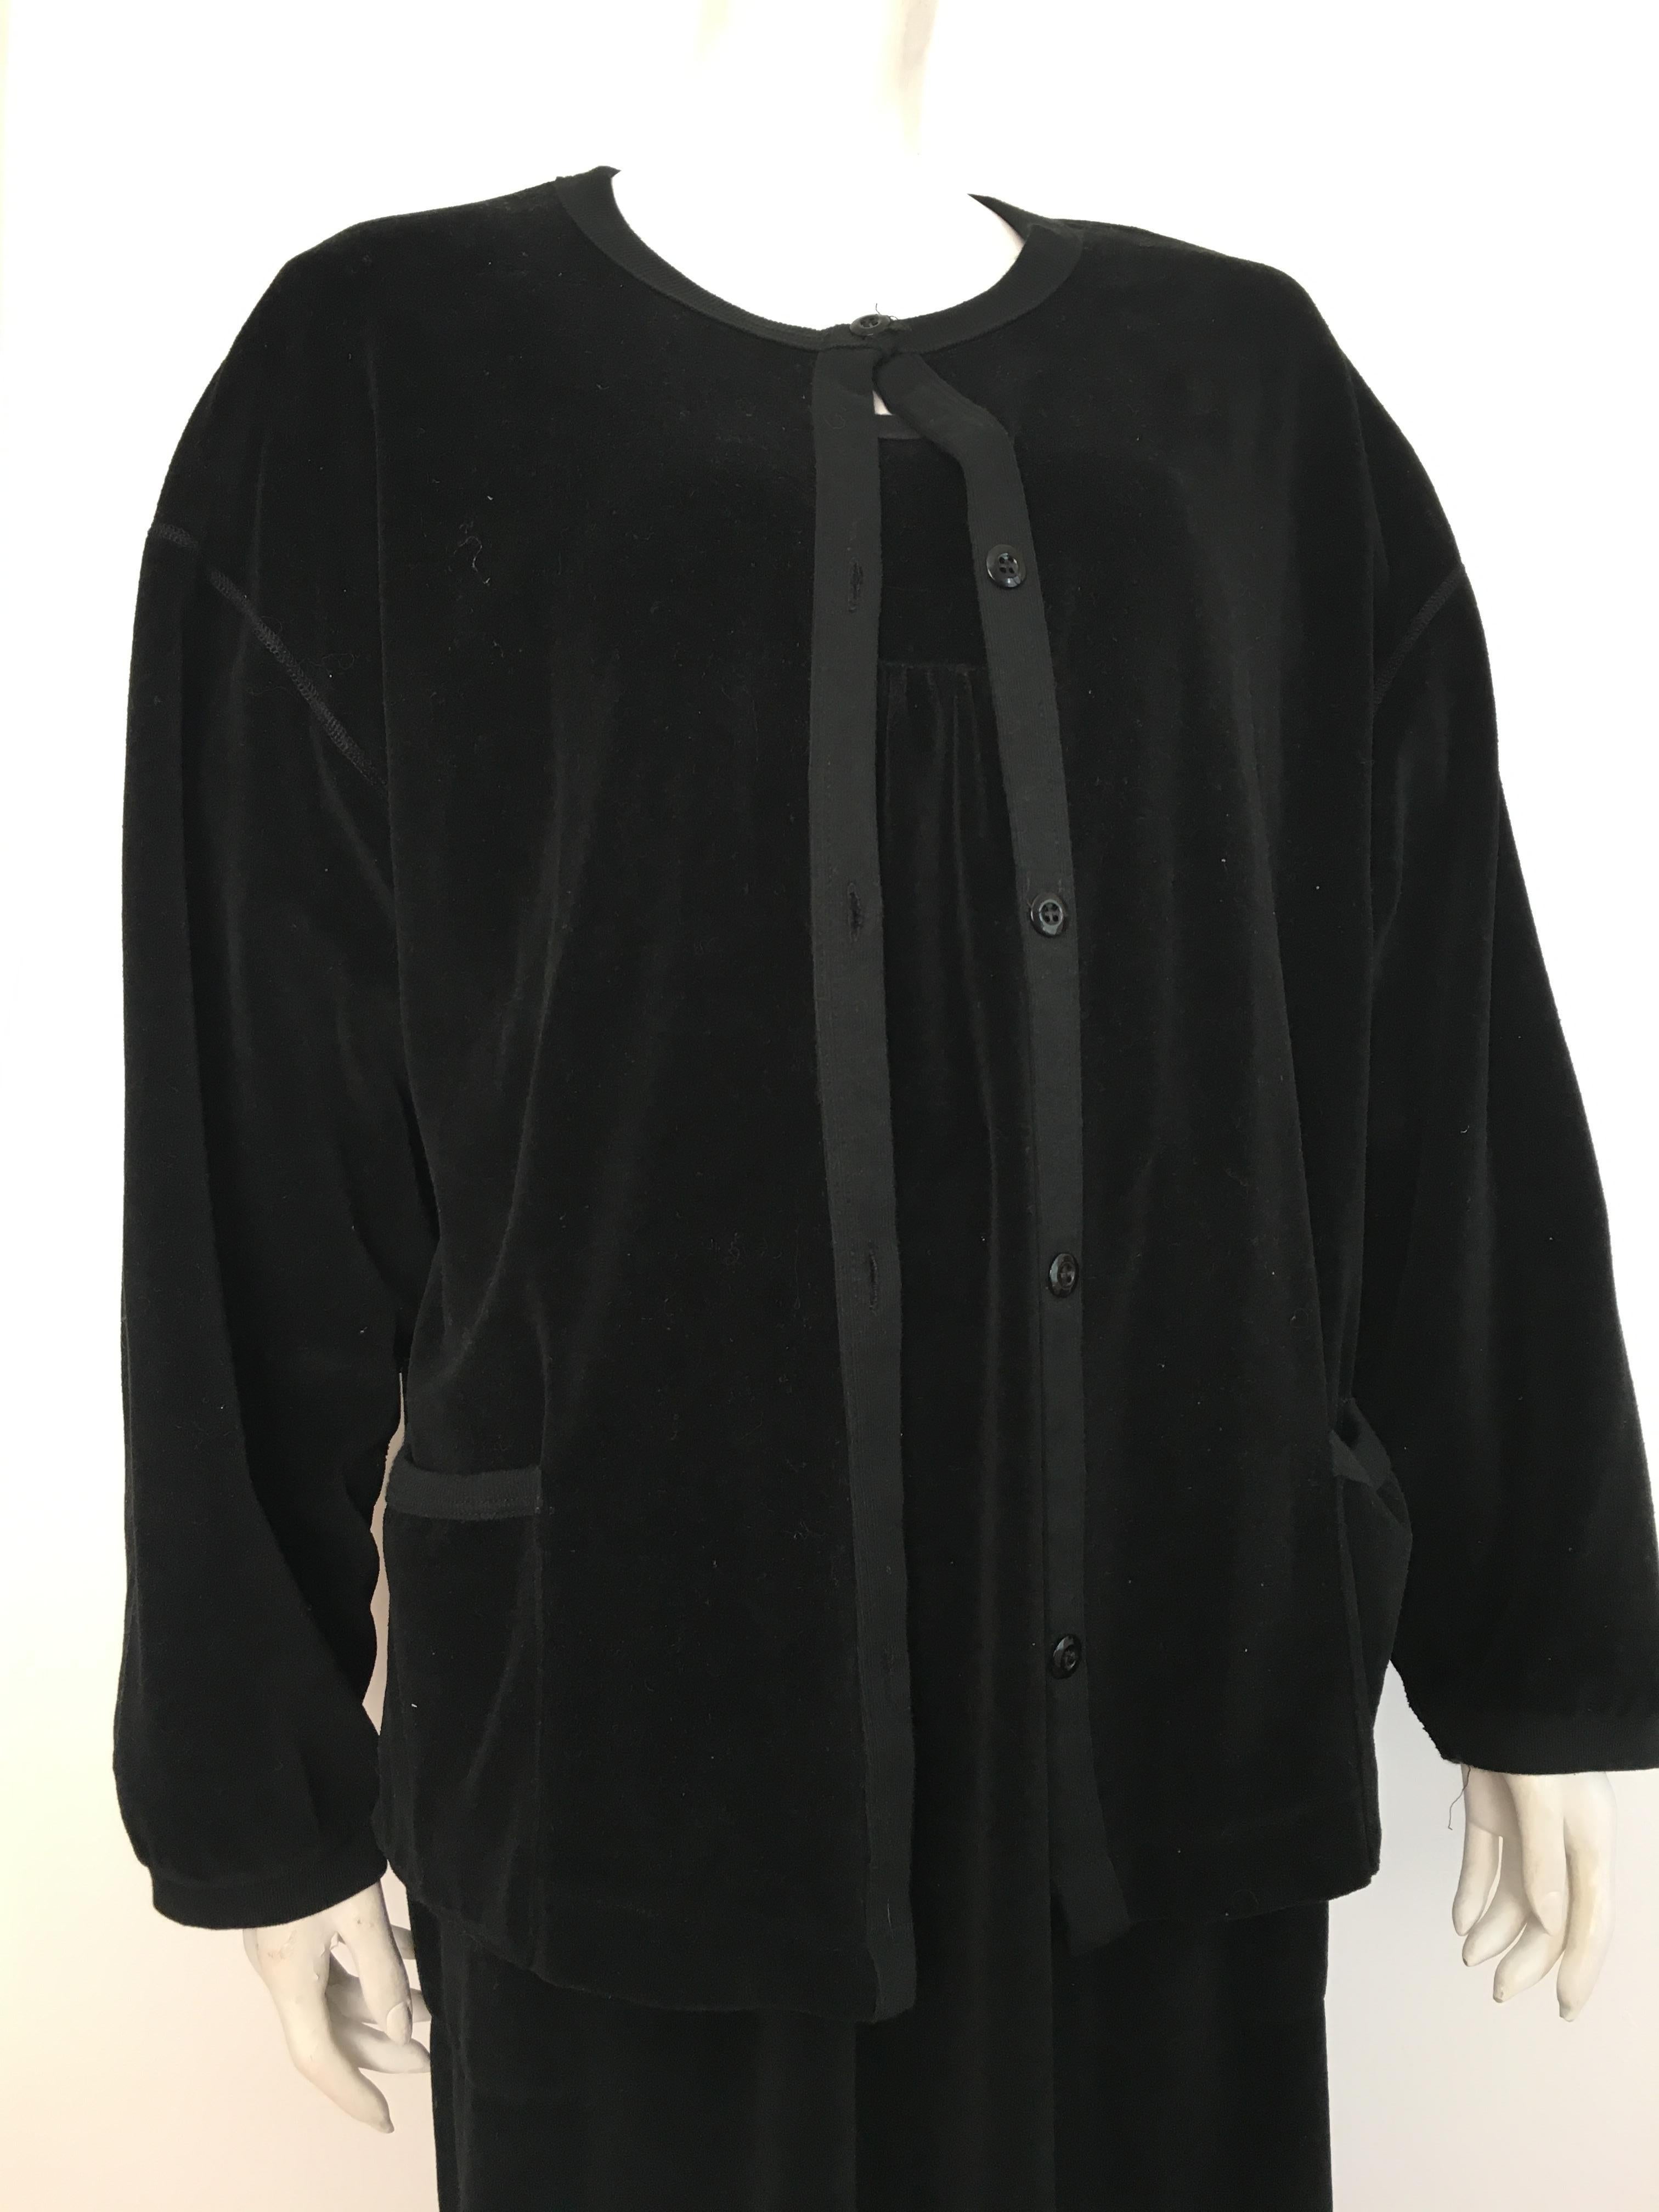 Sonia Rykiel 1980s Black Velour Dress with Pockets & Cardigan Size Large. For Sale 10